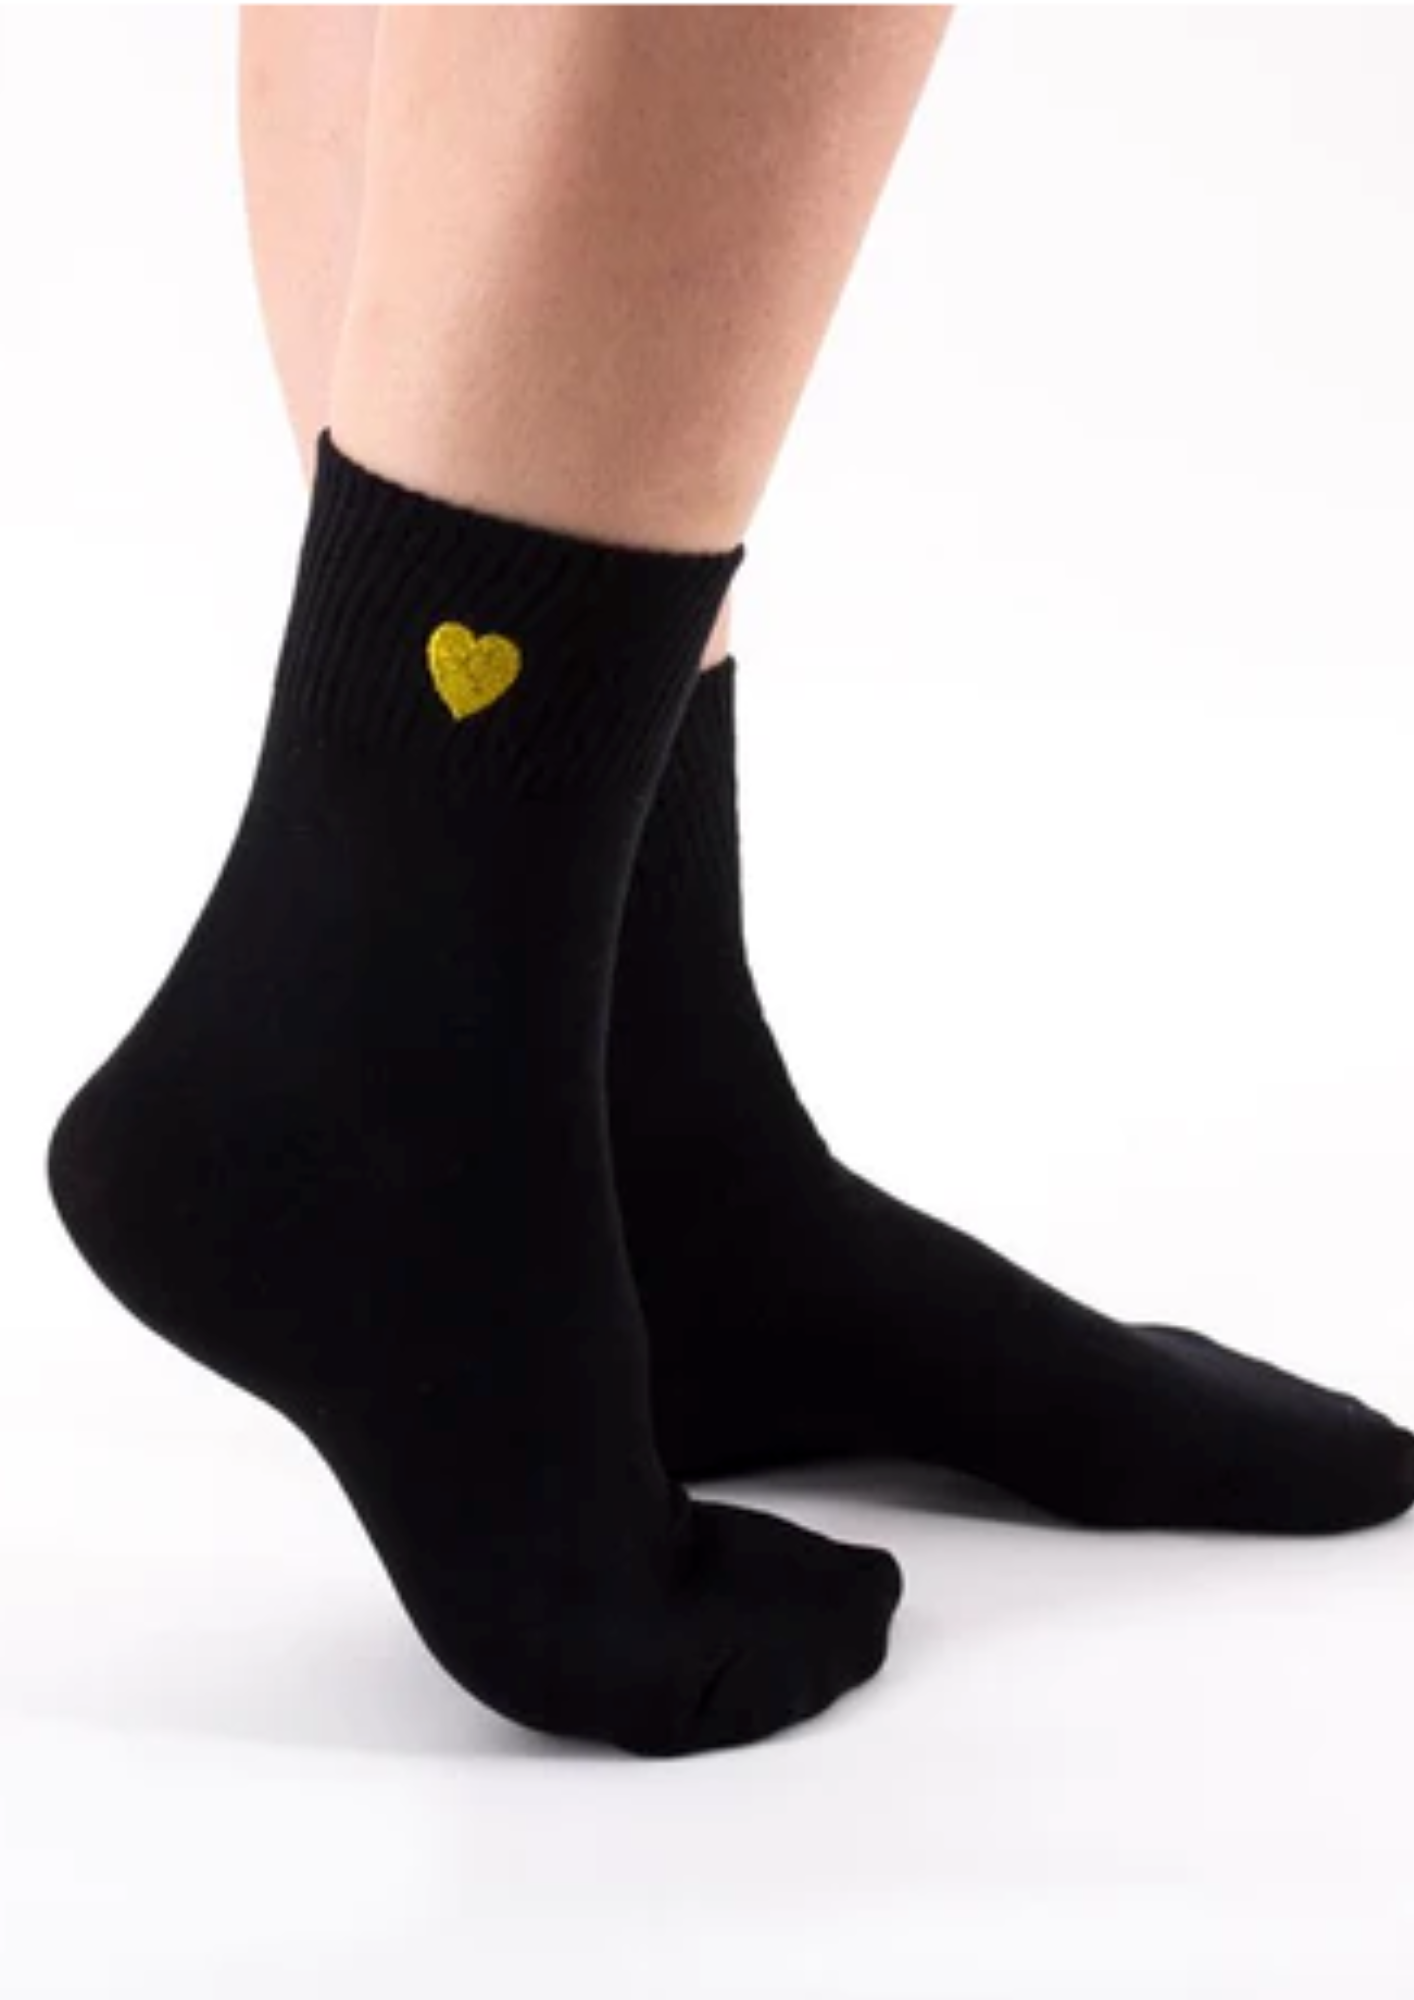 BLACK HIGH SOCKS WITH GOLD HEART